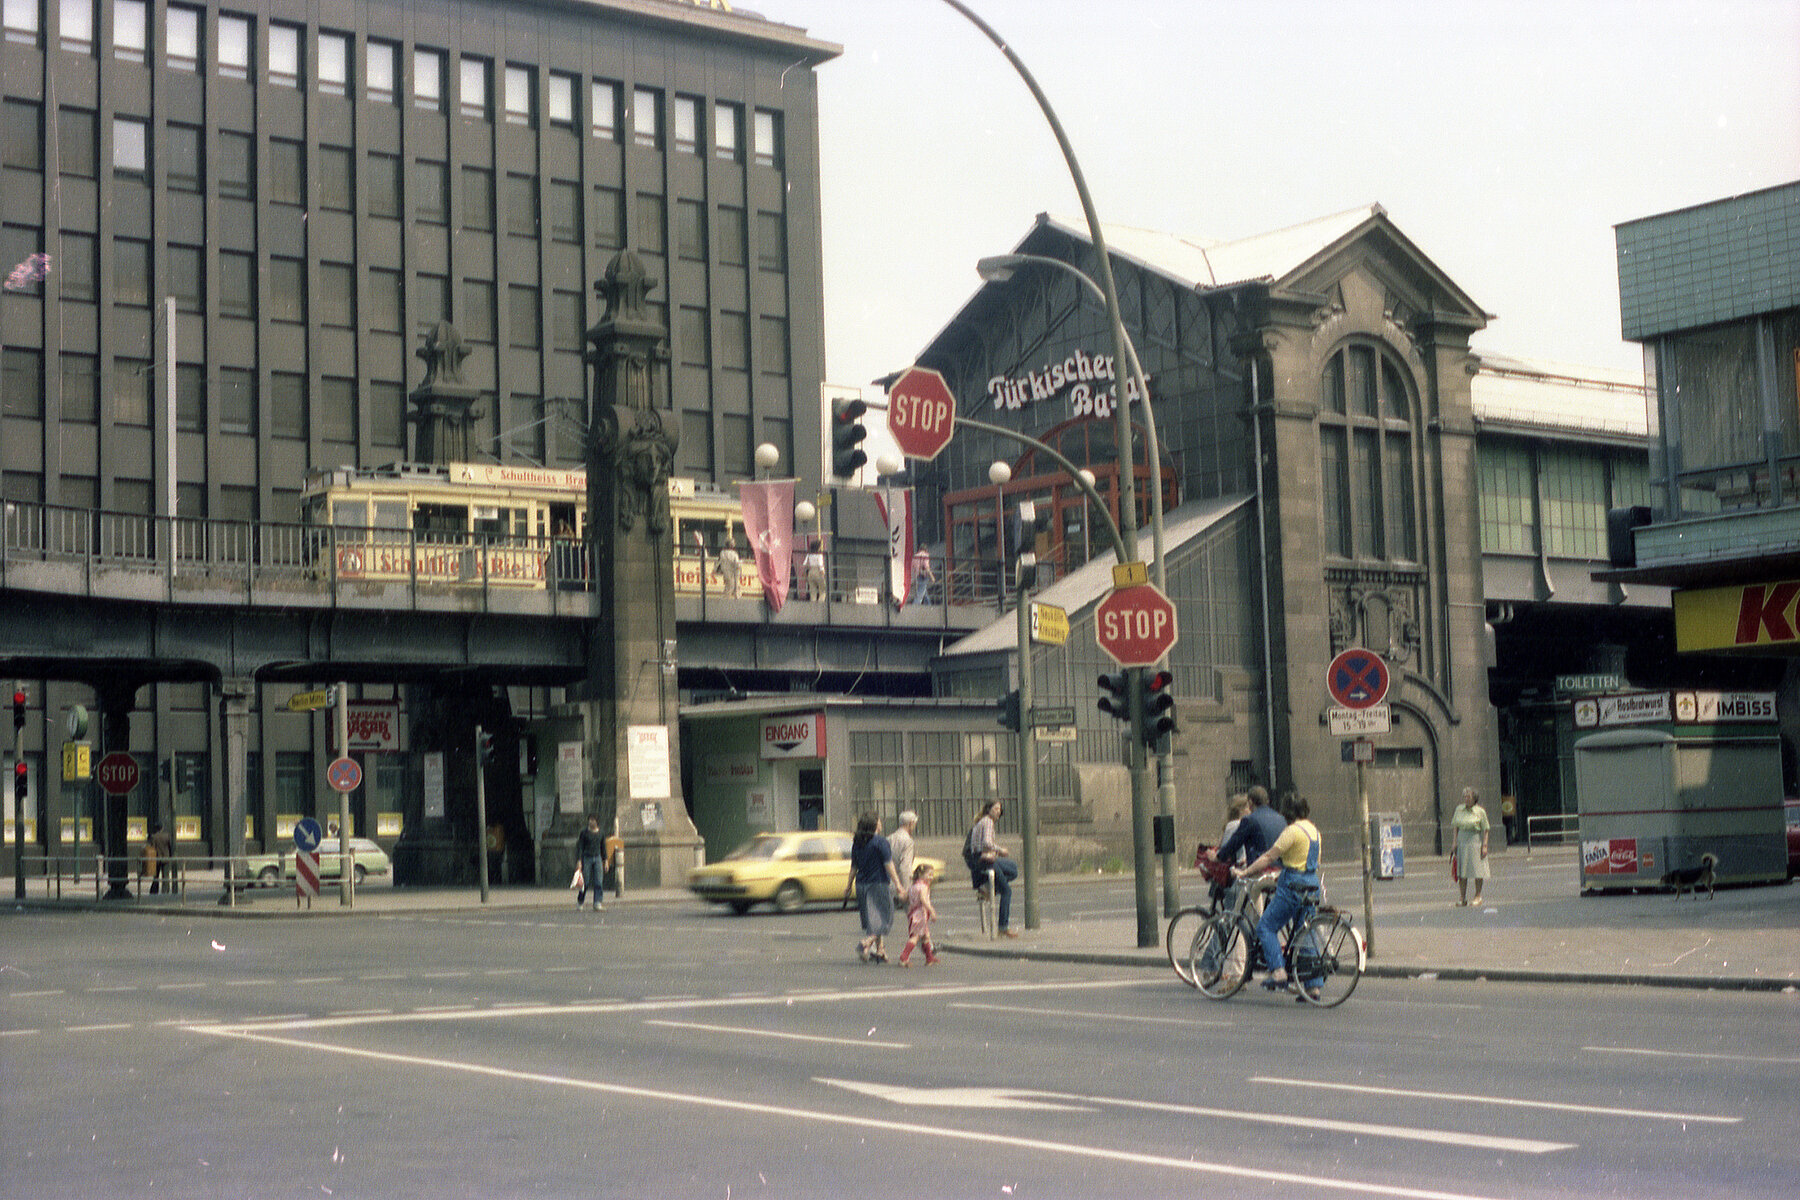 The elevated Bülowstraße Station with the lettering Turkish Bazaar, tracks and historic streetcar behind a street intersection with bicycle traffic, foot traffic and cars.